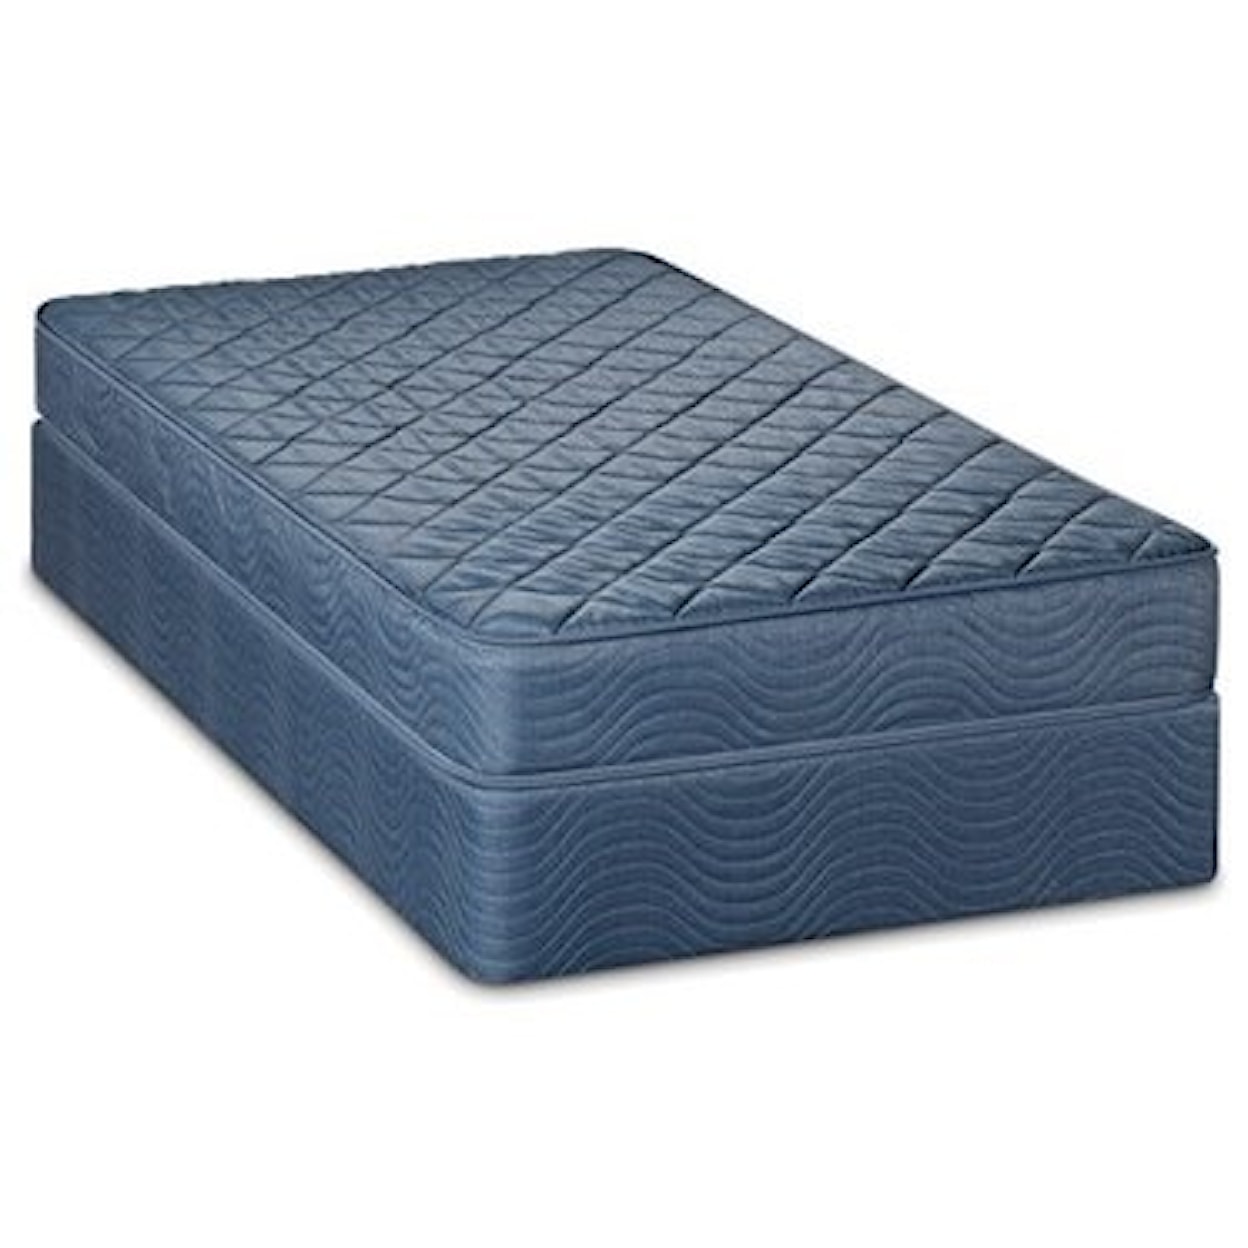 Restonic Charles II Queen Pocketed Coil Mattress Set